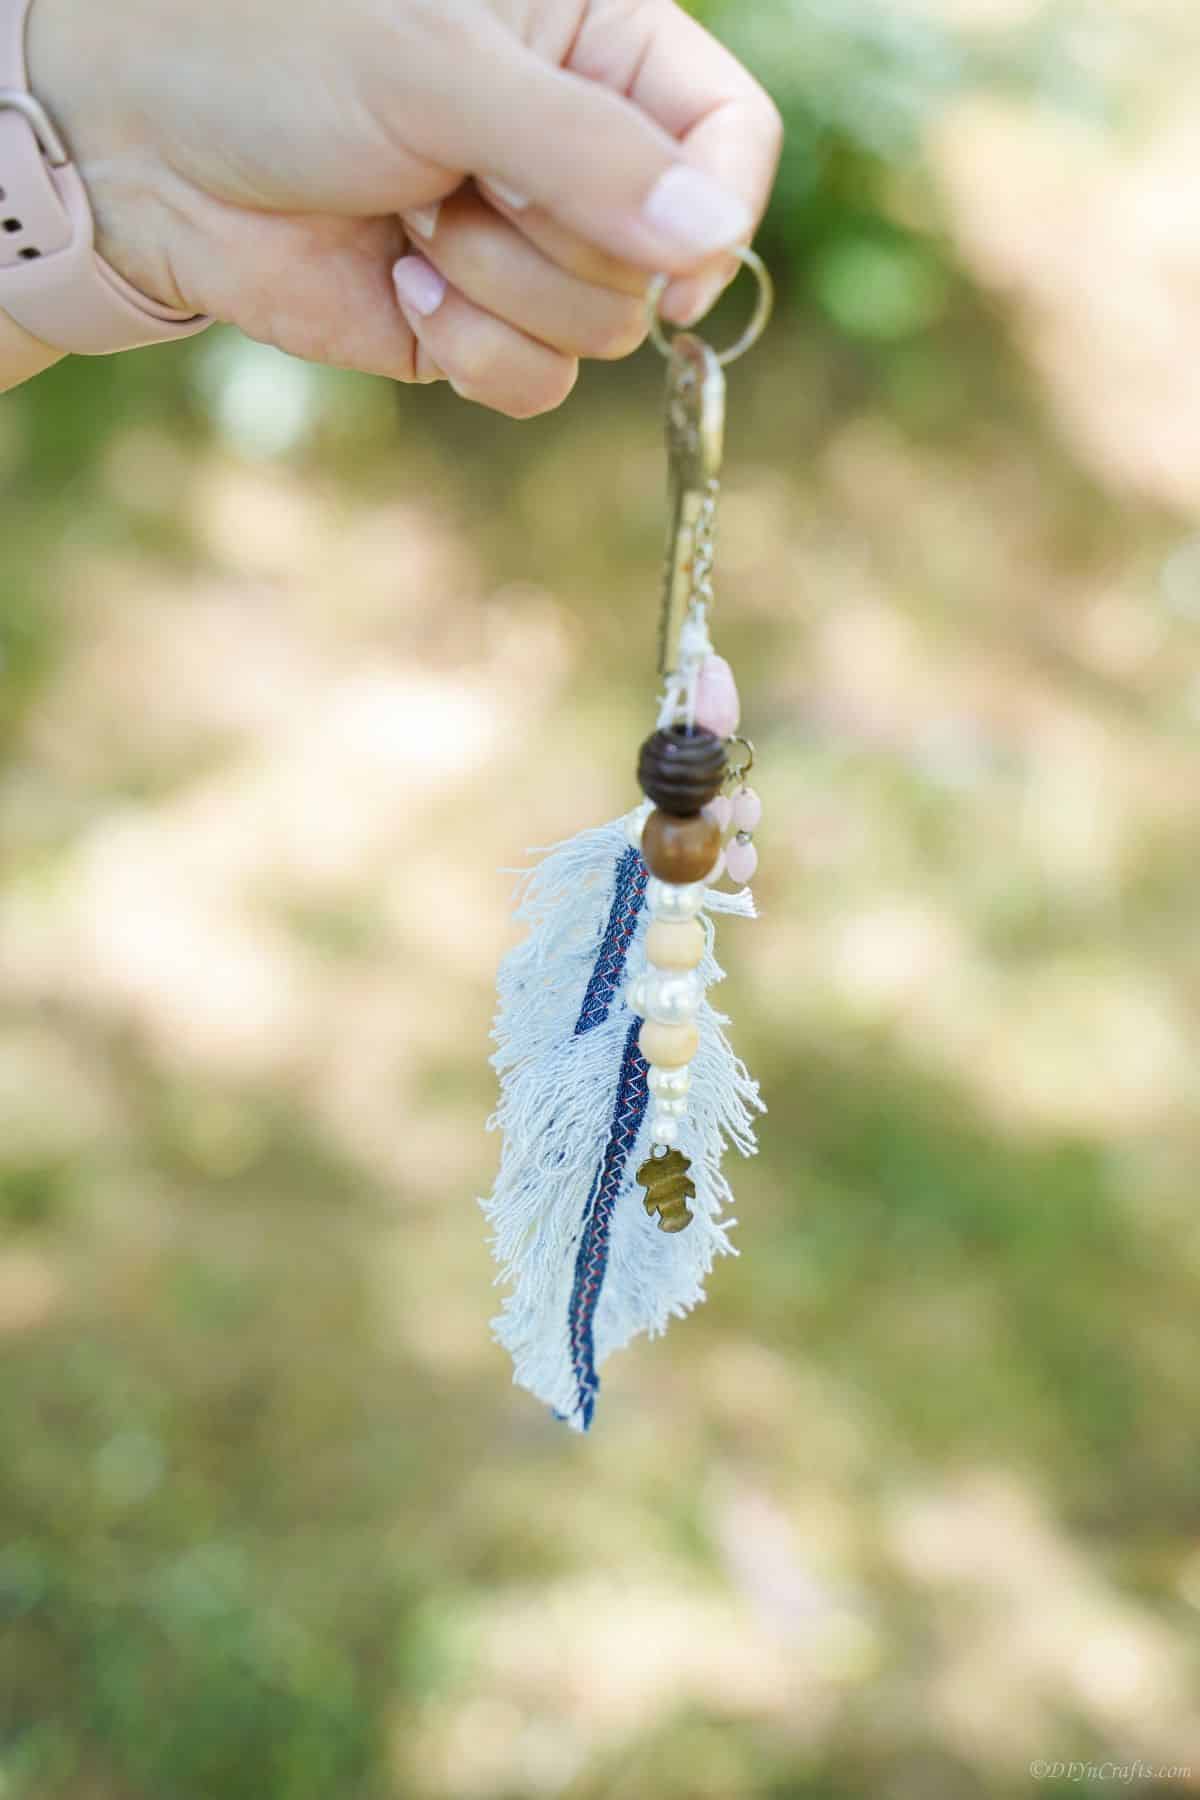 beaded old blue jeans feather keychain being held by hand in front of grass